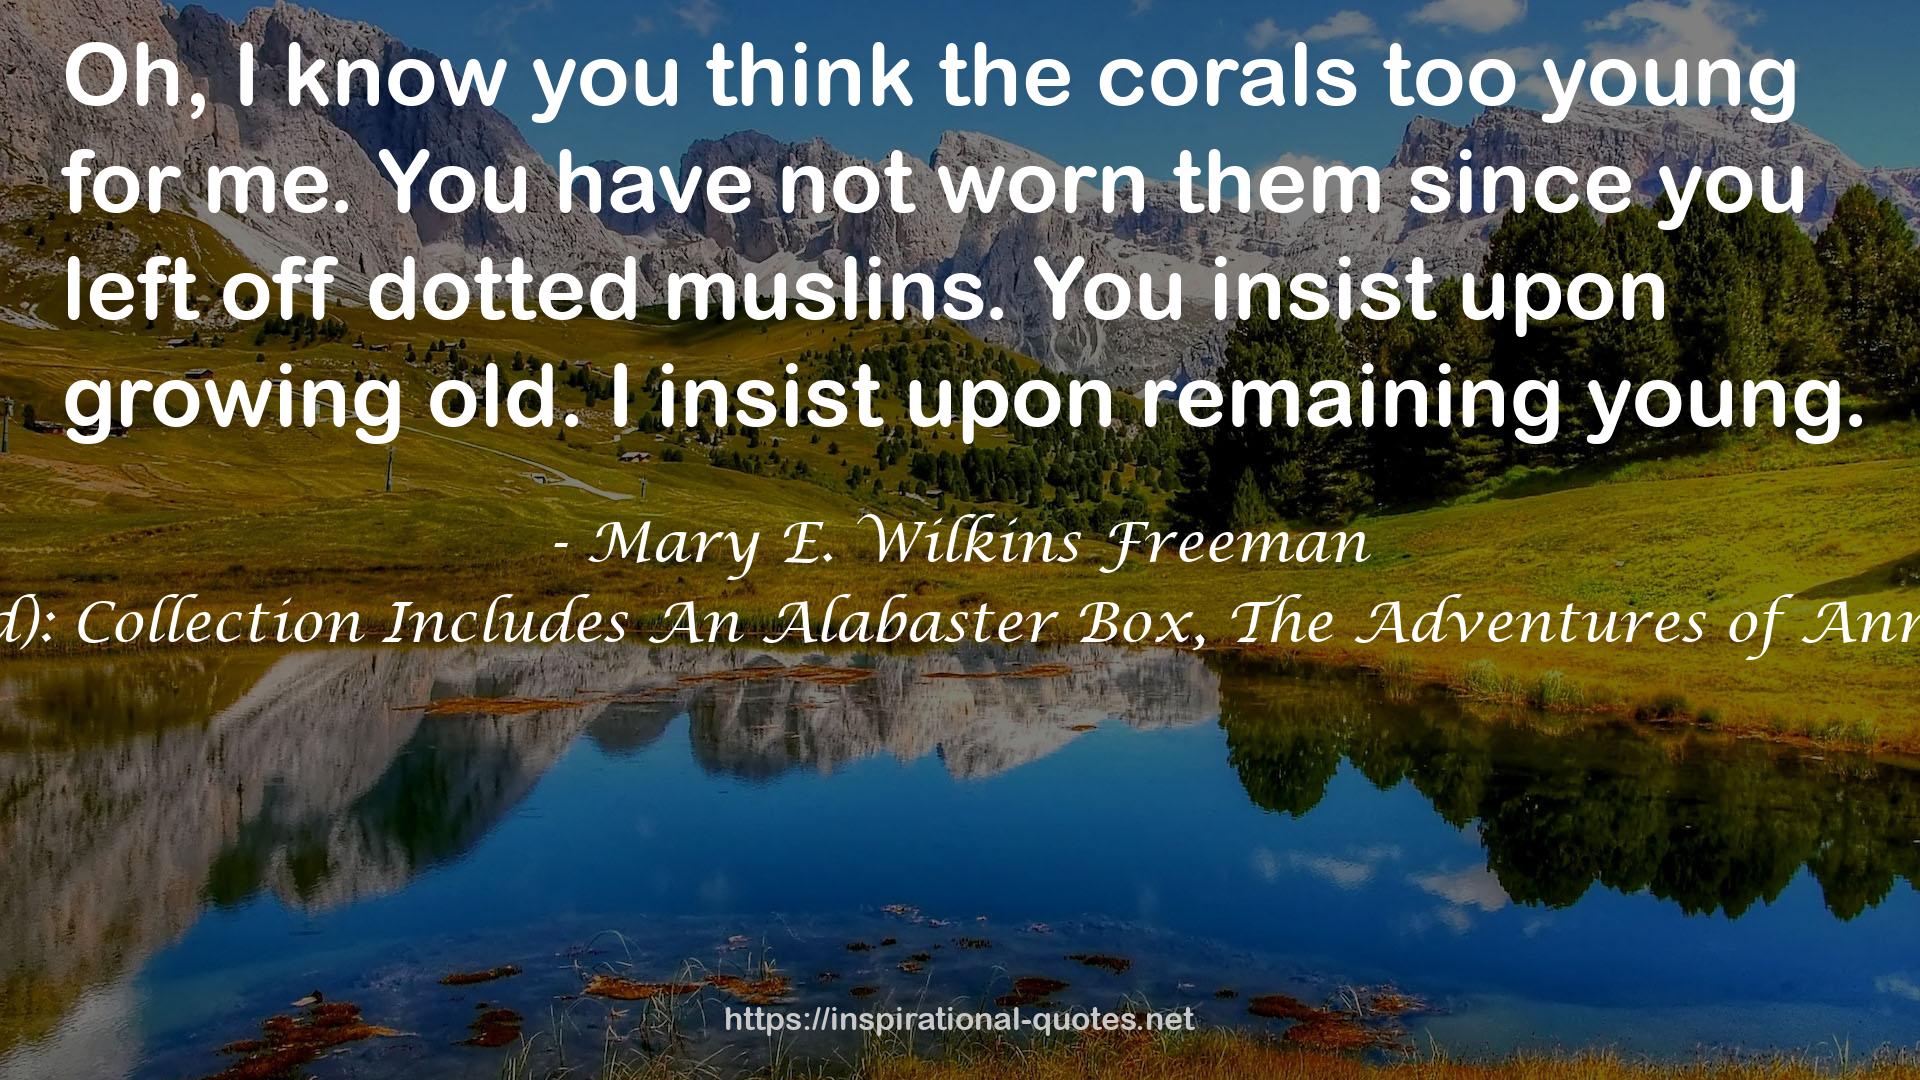 Mary E. Wilkins Freeman QUOTES